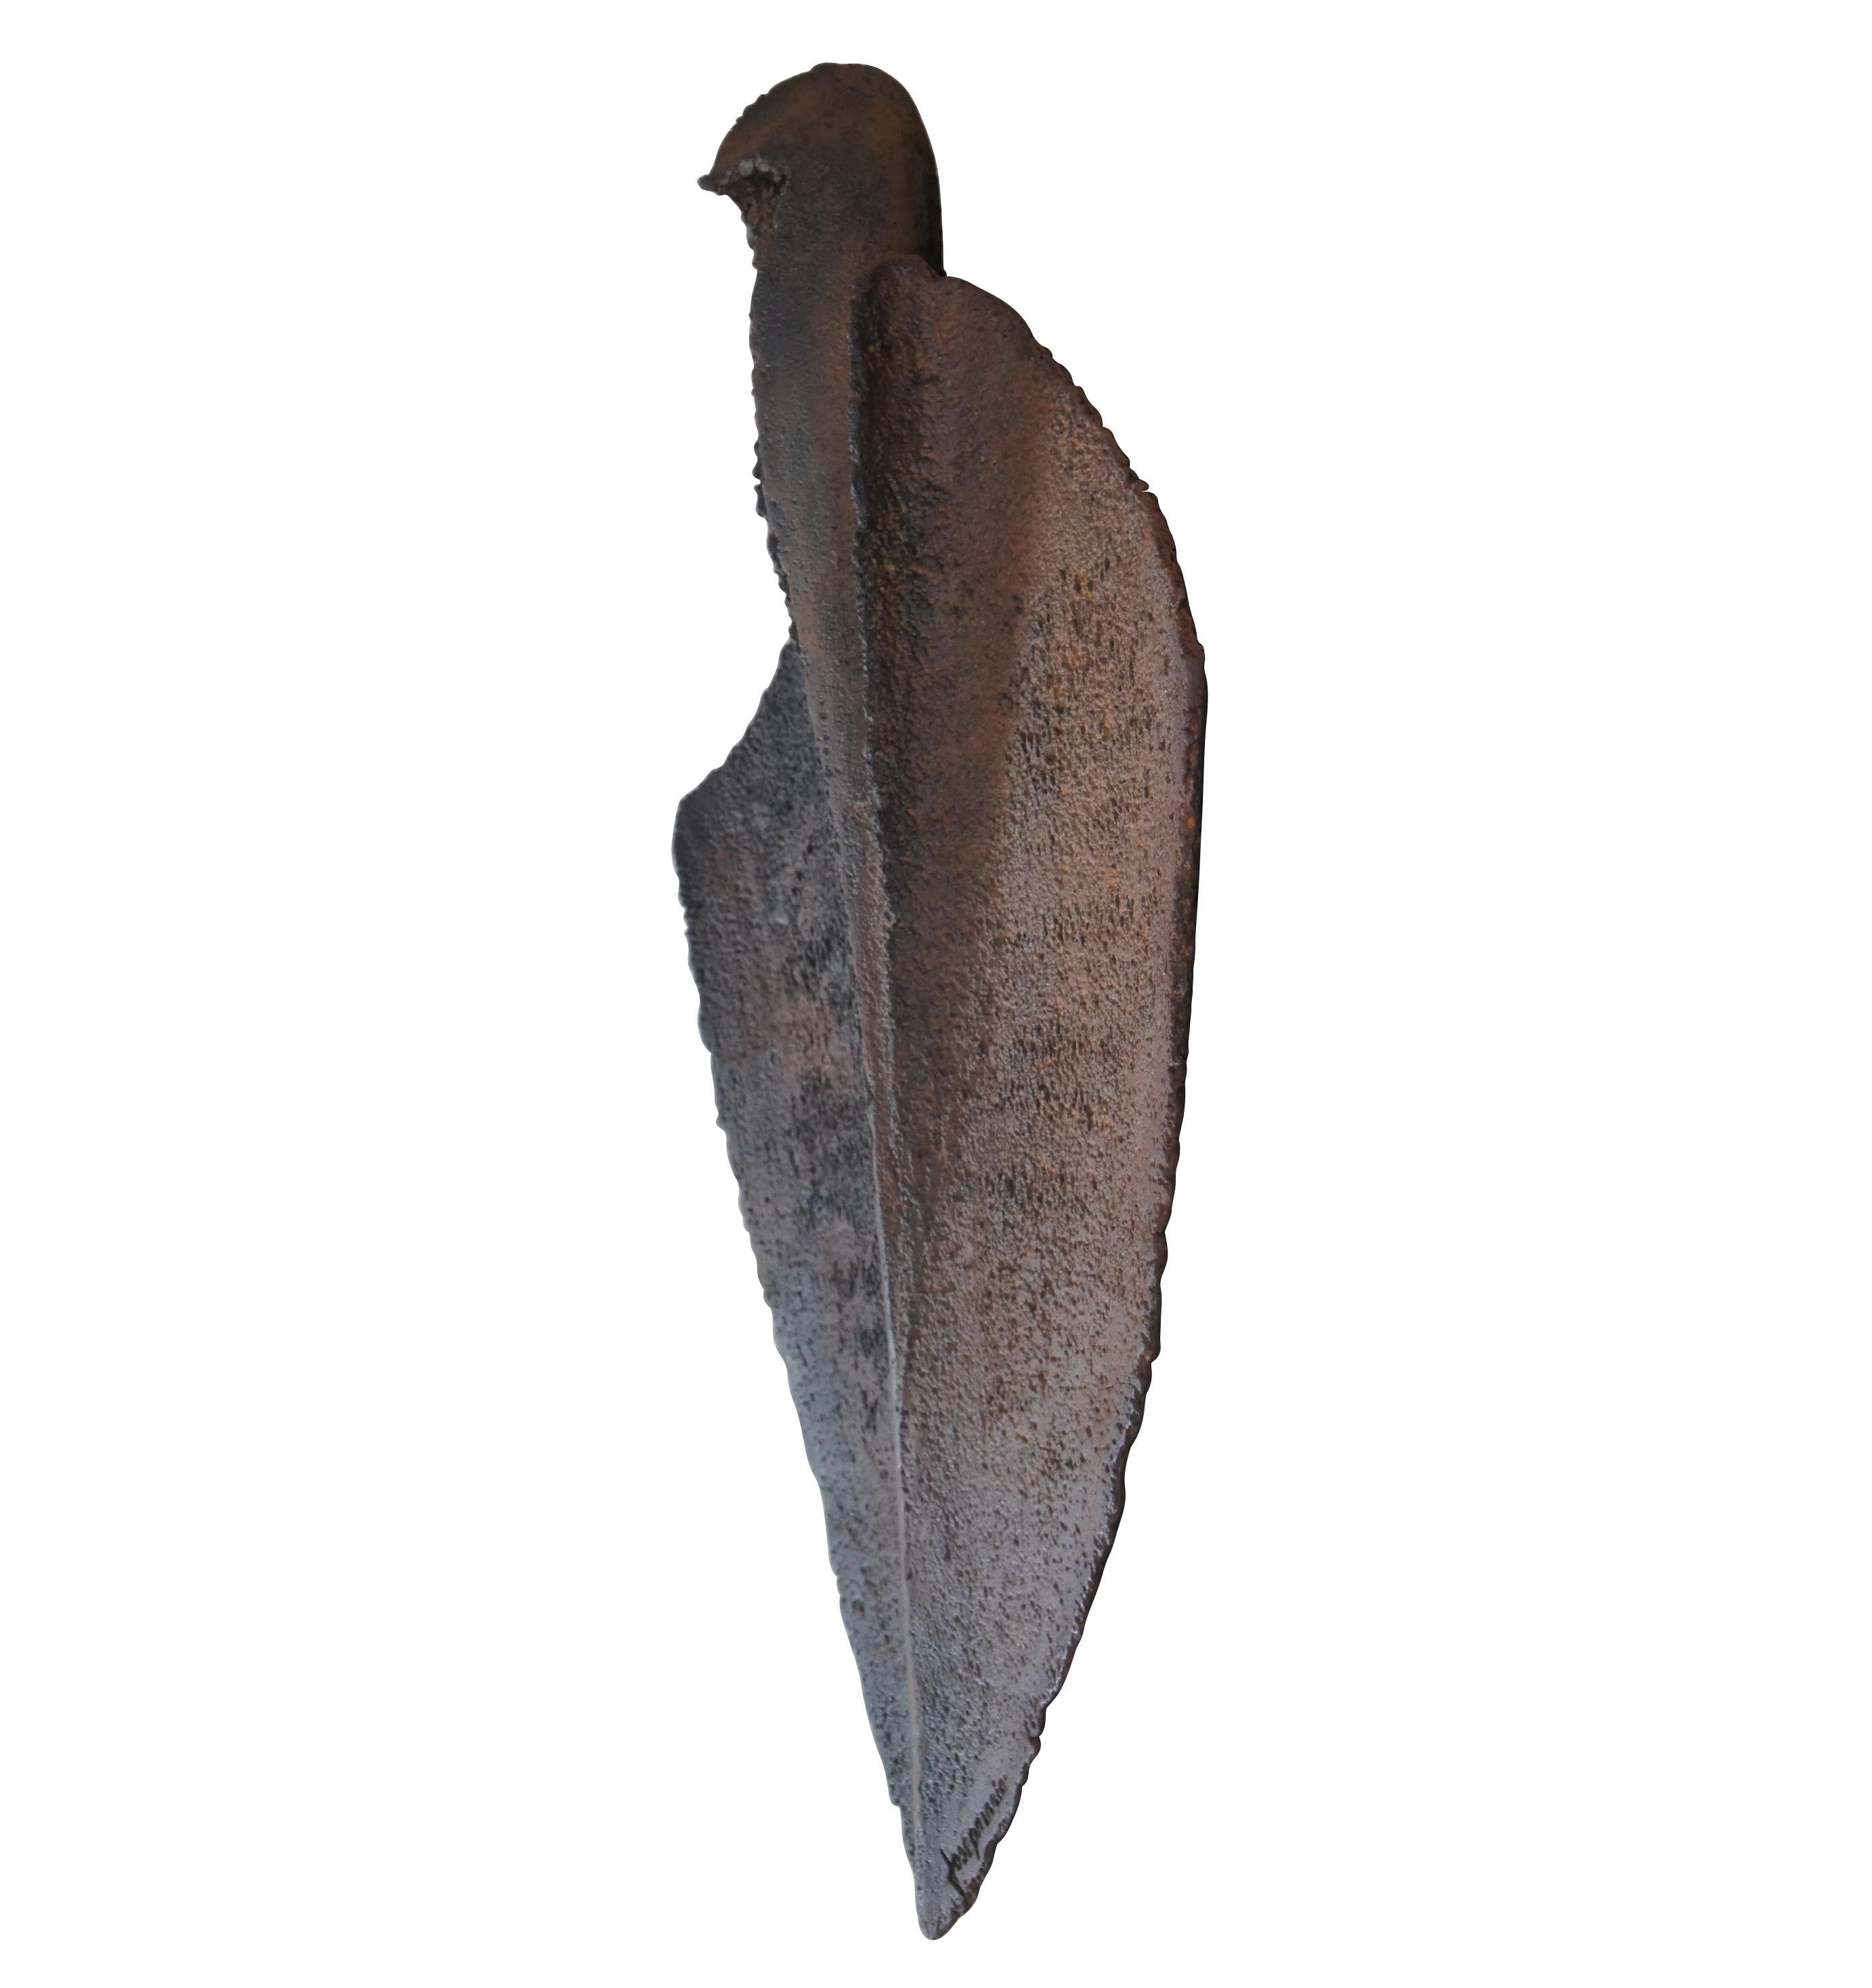 An Impressive Cast Iron wall hanging sculpture by Josep Maria Subirachs, circa 1960s. Reminiscent in form to an arrowhead or primitive blade. Josep incorporated grattage leaving the surface rough and jagged. Signed along lower edge. From the private